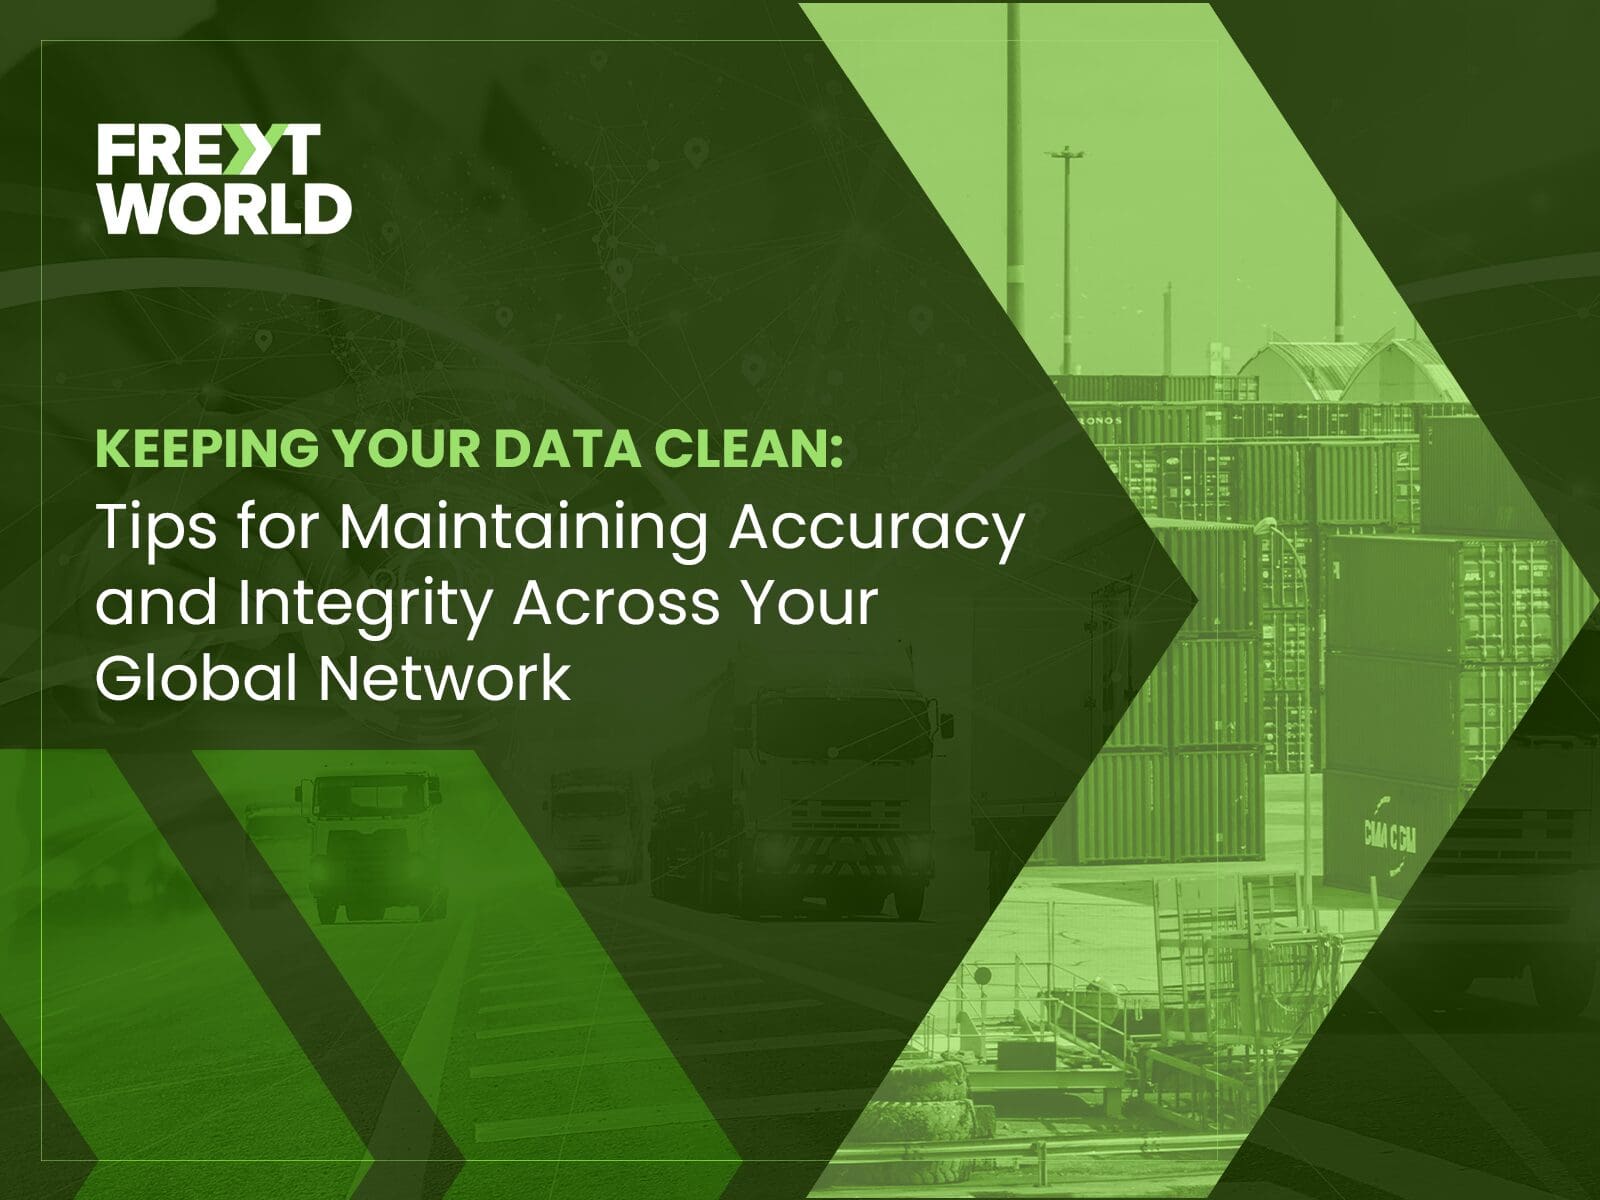 Keeping Your Data Clean: Tips for Maintaining Accuracy and Integrity Across Your Global Network